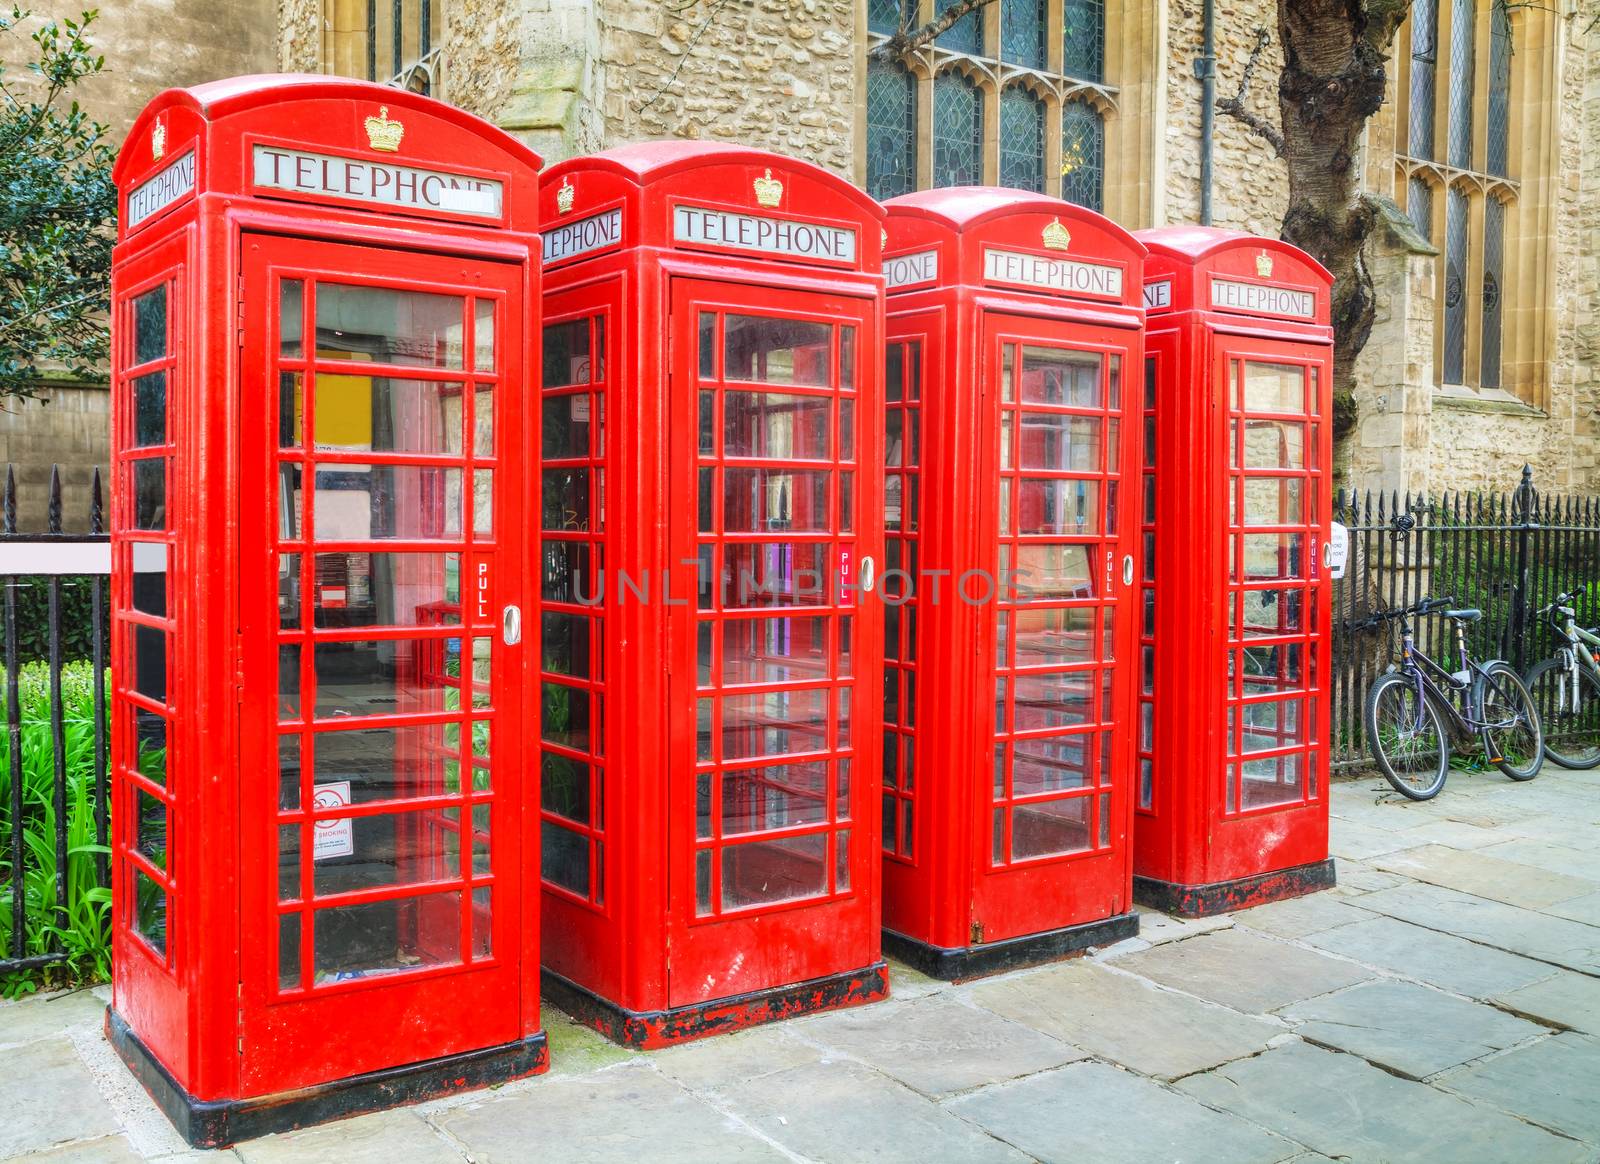 Famous red telephone booths in Cambridge, UK